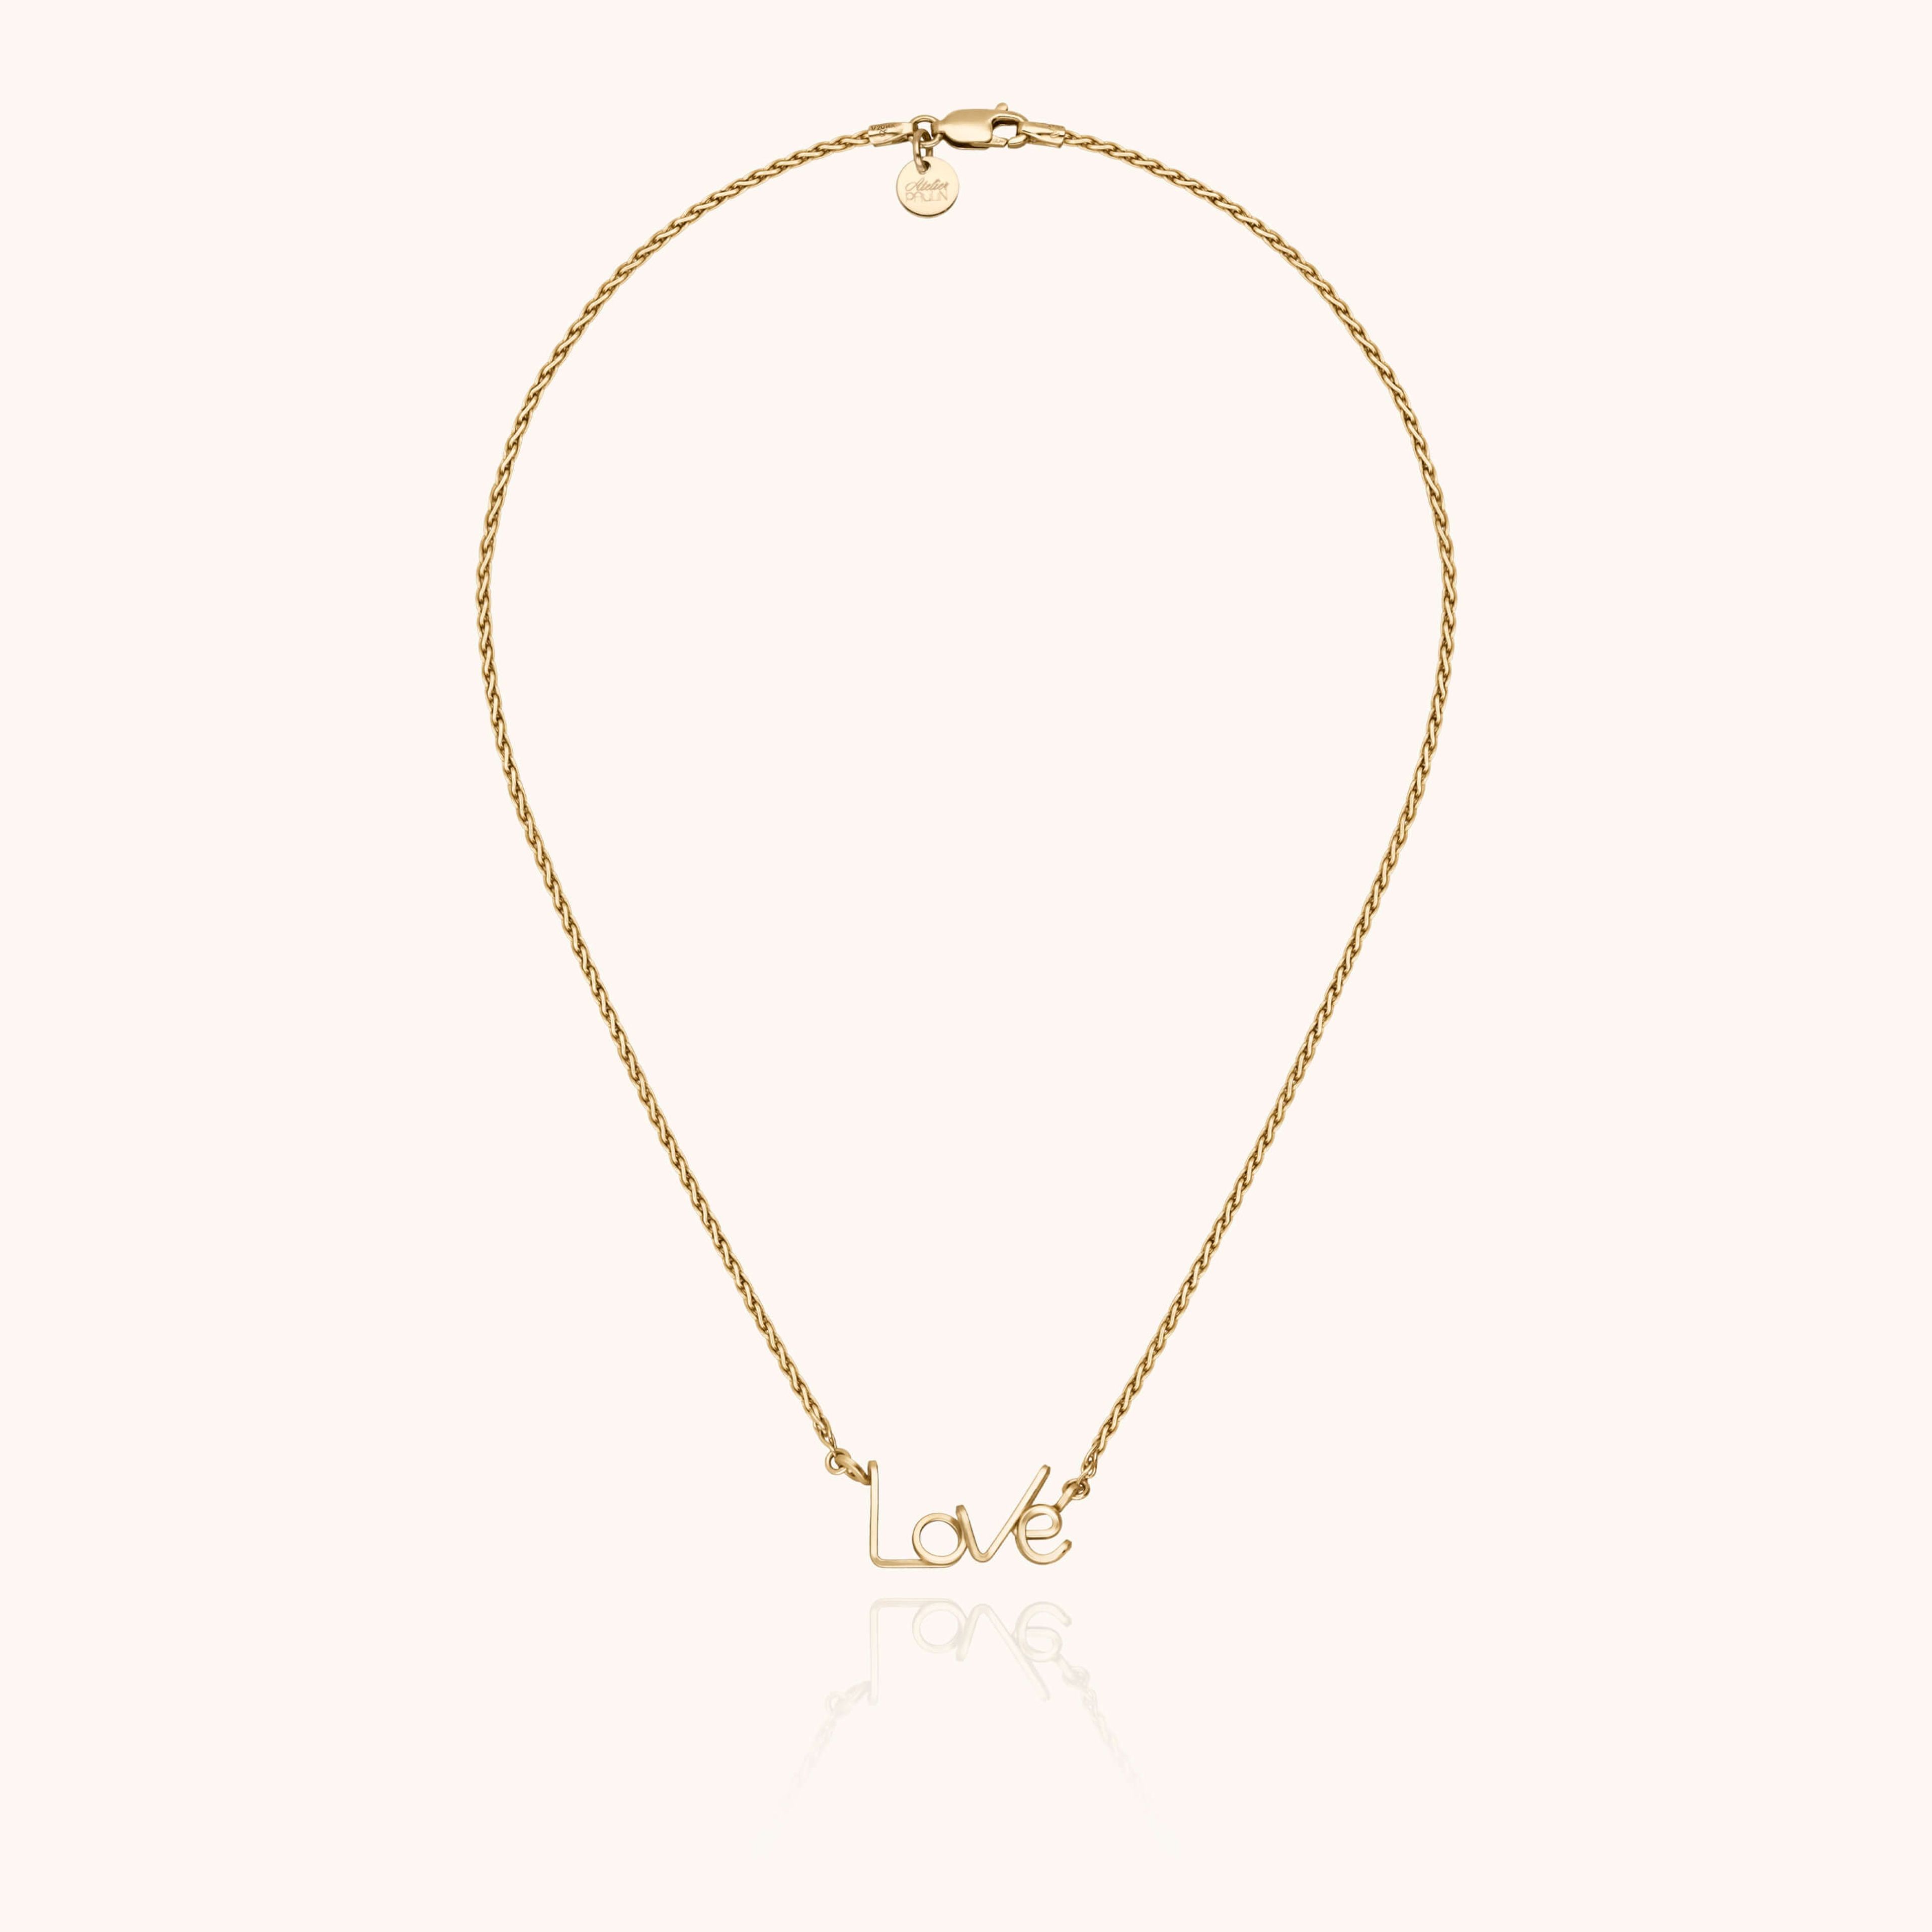 Love Squared Necklace